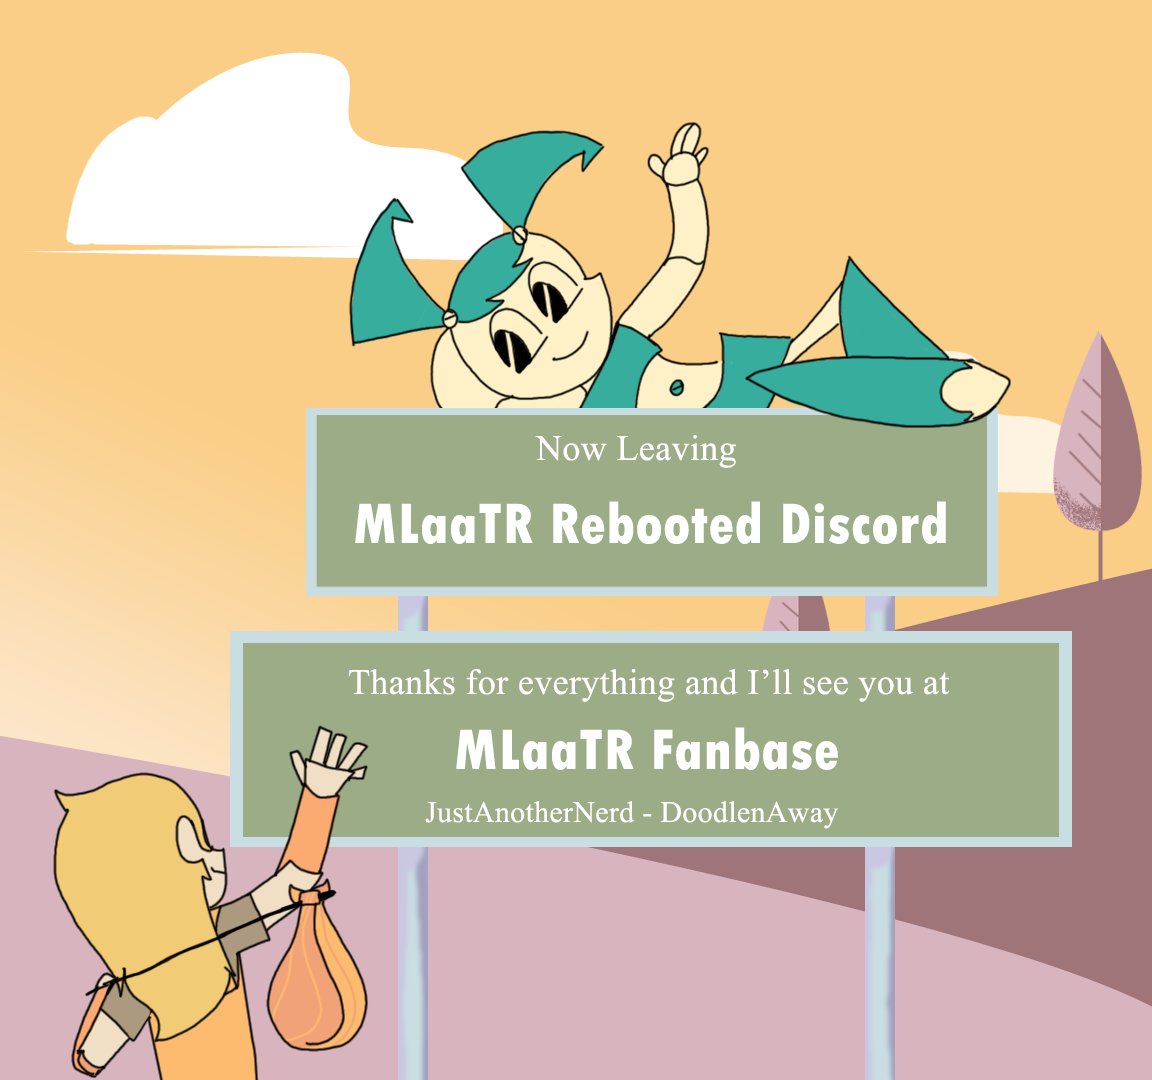 Tonight the discord for @MLaaTR_Reboot is going to read mode and everyone is officially going to be joined together again in the @MLaaTRFanbase discord. So have some little traveling doodles, and please excuse my inconsistent Jenny(s), as we move over.
I'll see you all there. https://t.co/T0ybuPemtW